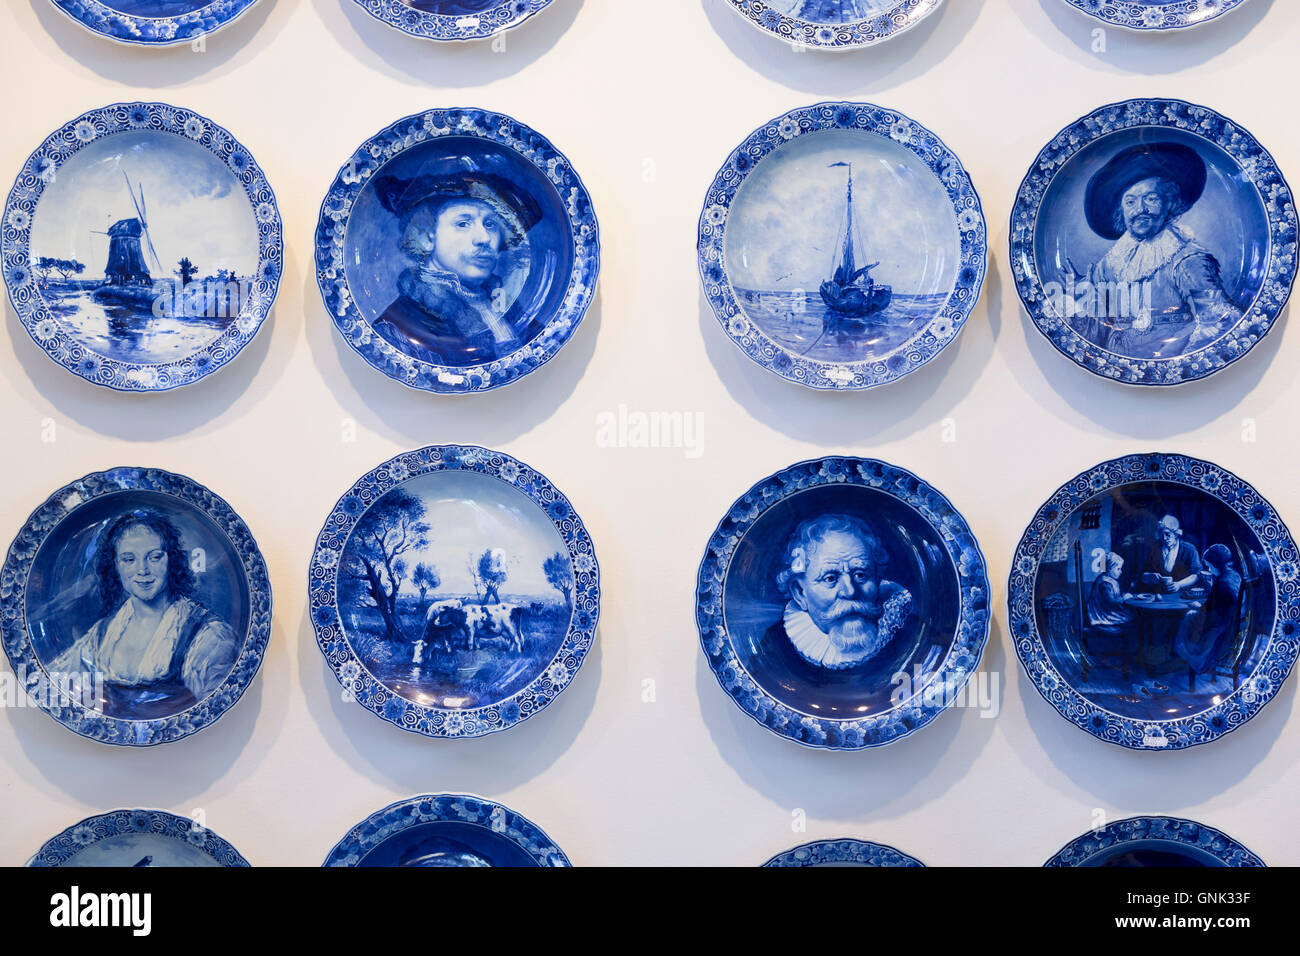 Commemorative Plates Delft Blue luxury old hand-painted porcelain commemorative plates at Royal  Delft Experience shop in Amsterdam, Holland Stock Photo - Alamy